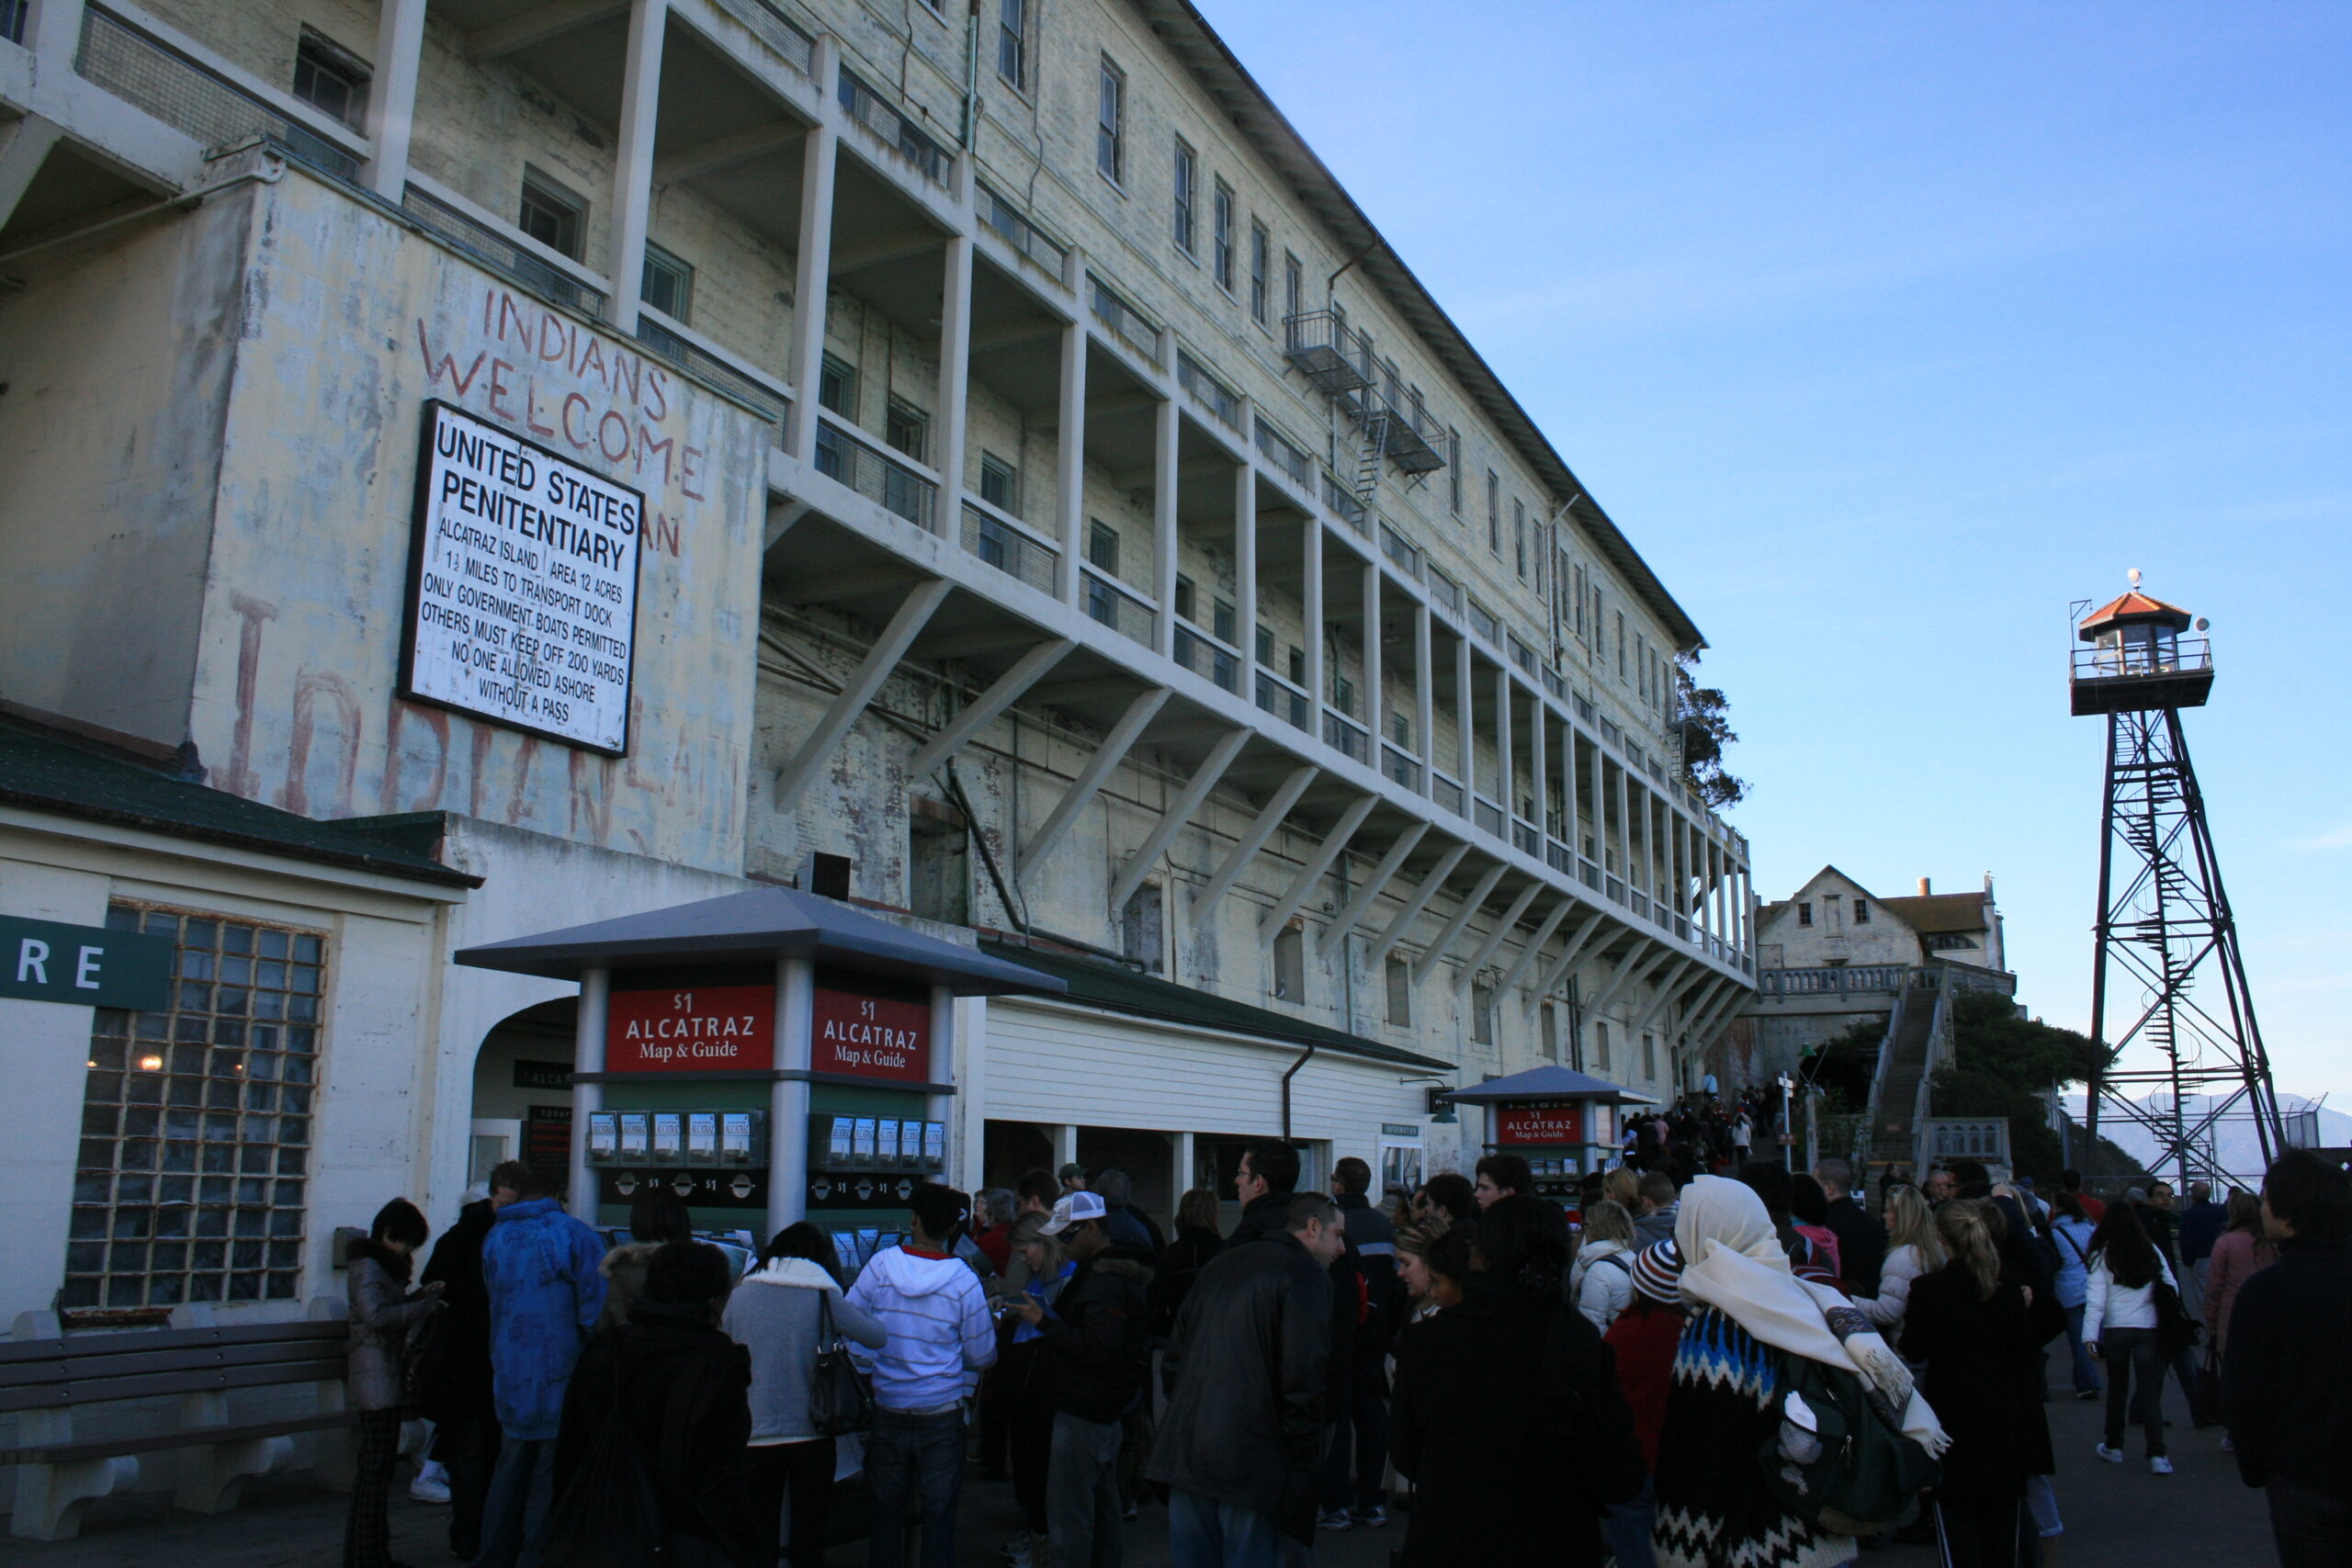 A sign welcomes tourists to Alcatraz off the coast of San Francisco, Calif.